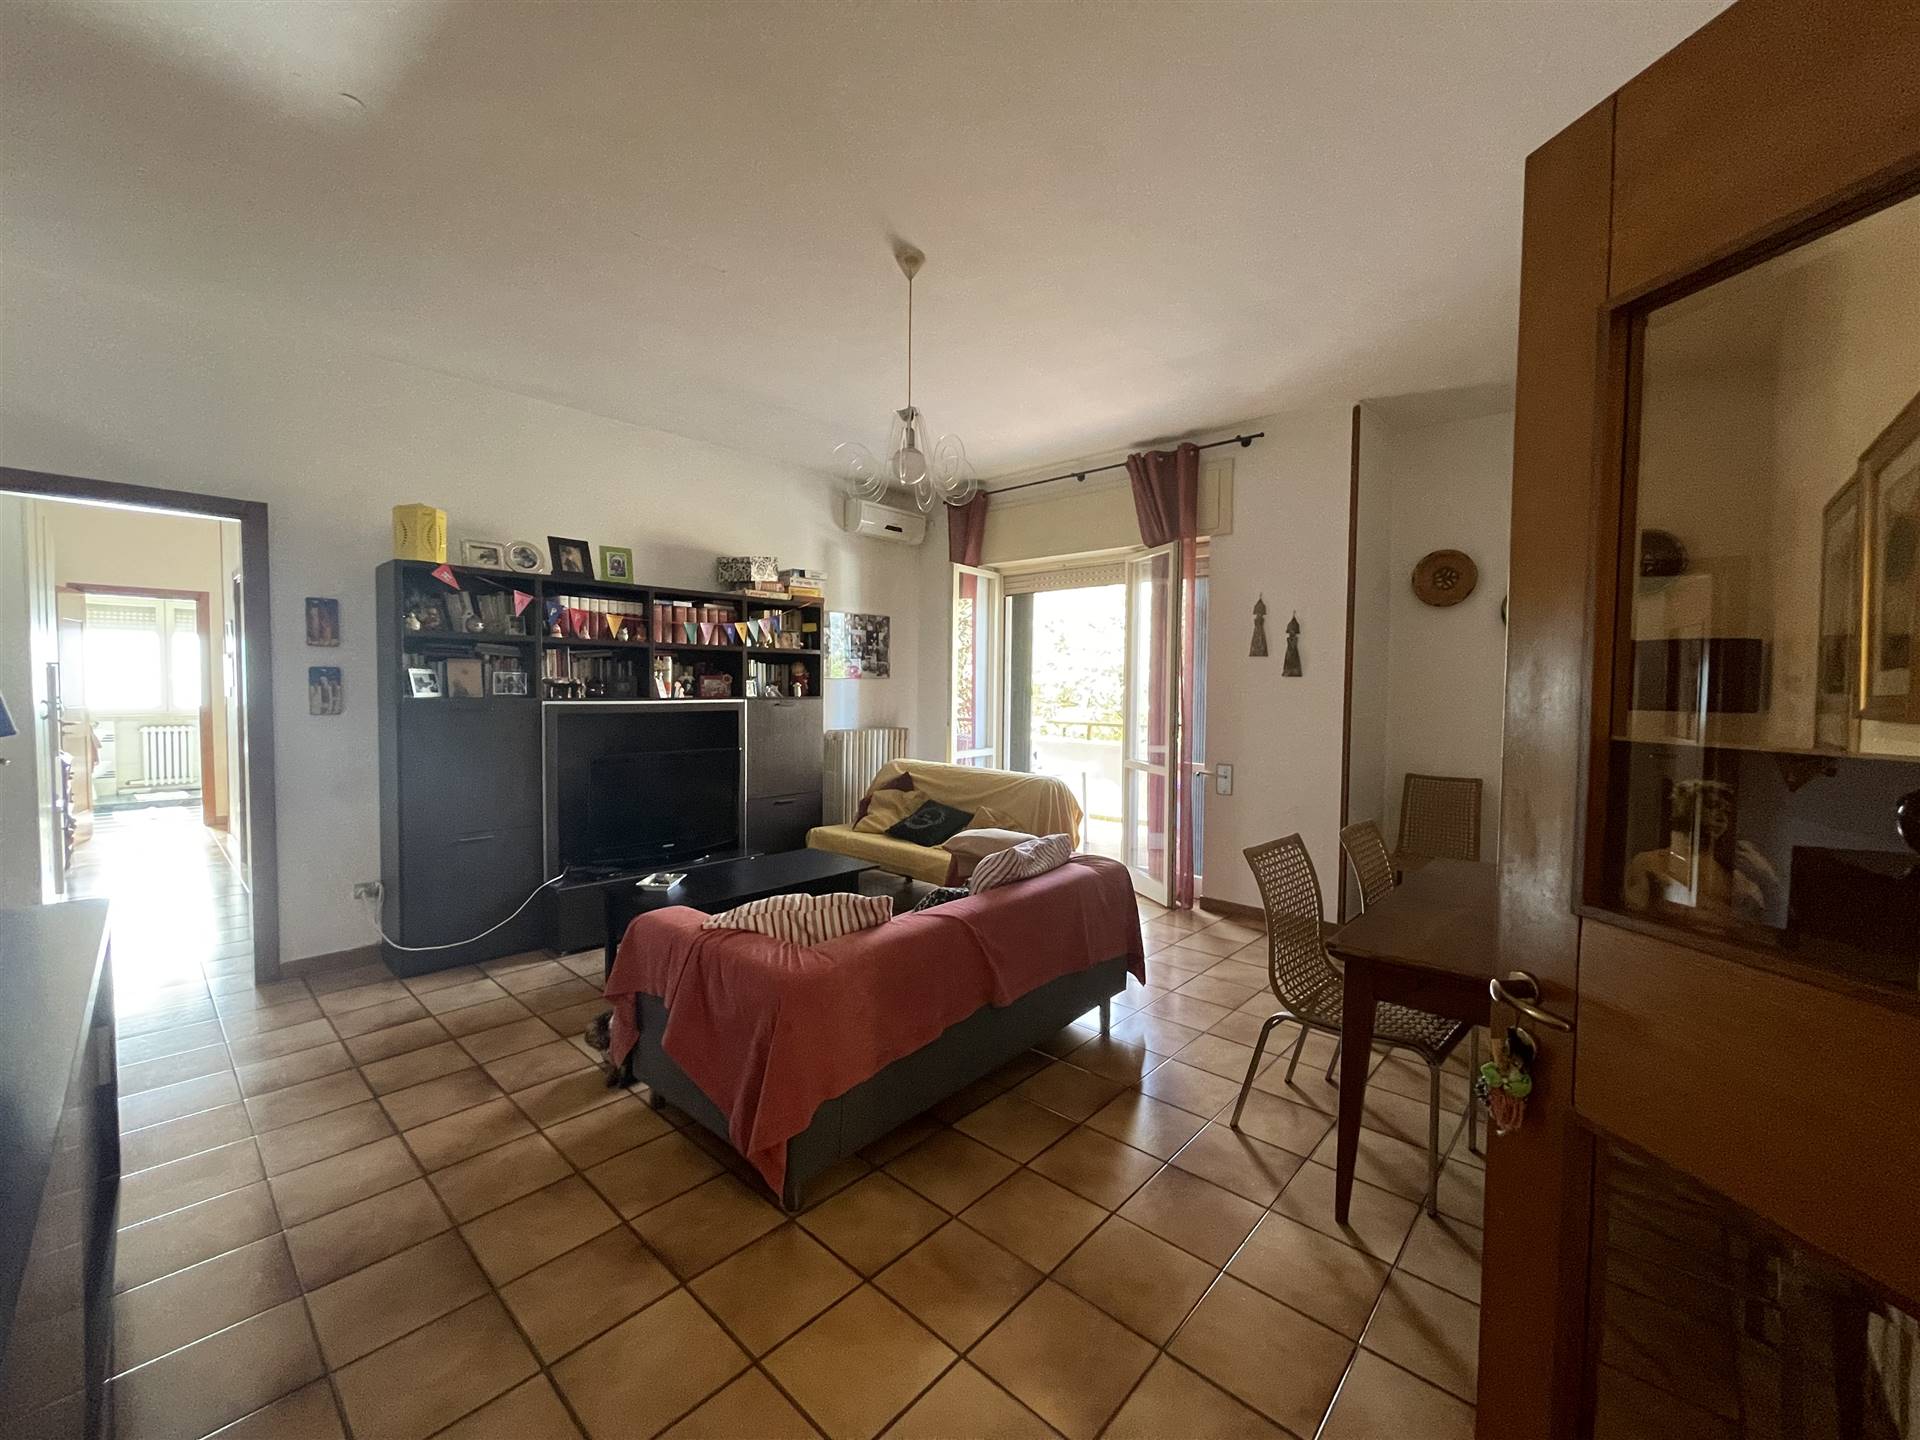 ZONA CONSERVATORIO, LECCE, Apartment for sale of 115 Sq. mt., Habitable, Heating Individual heating system, Energetic class: F, Epi: 137,33 kwh/m2 